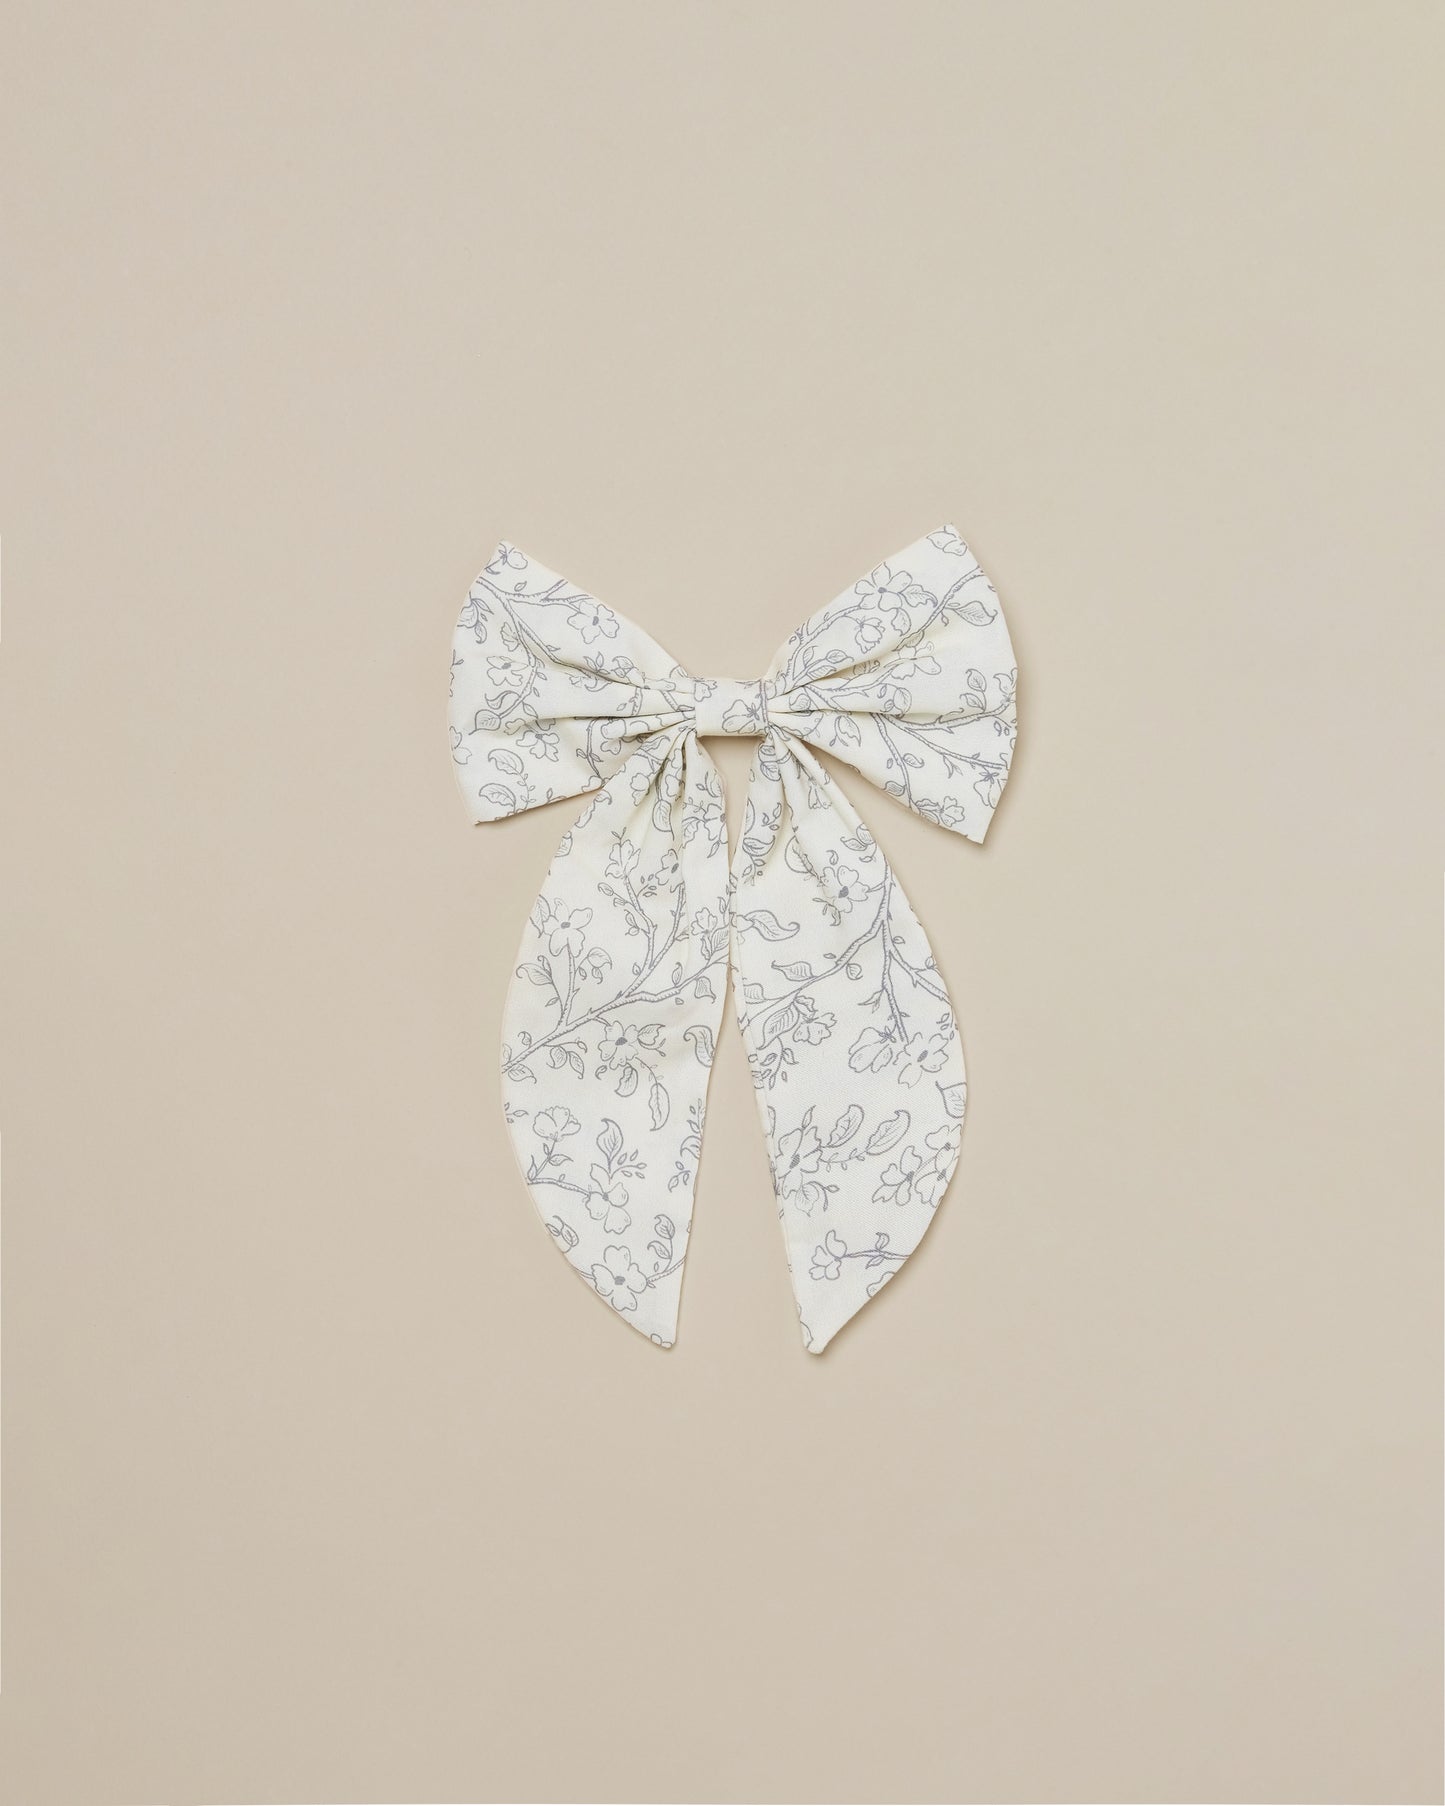 Oversized Hair Bow 4 Colors